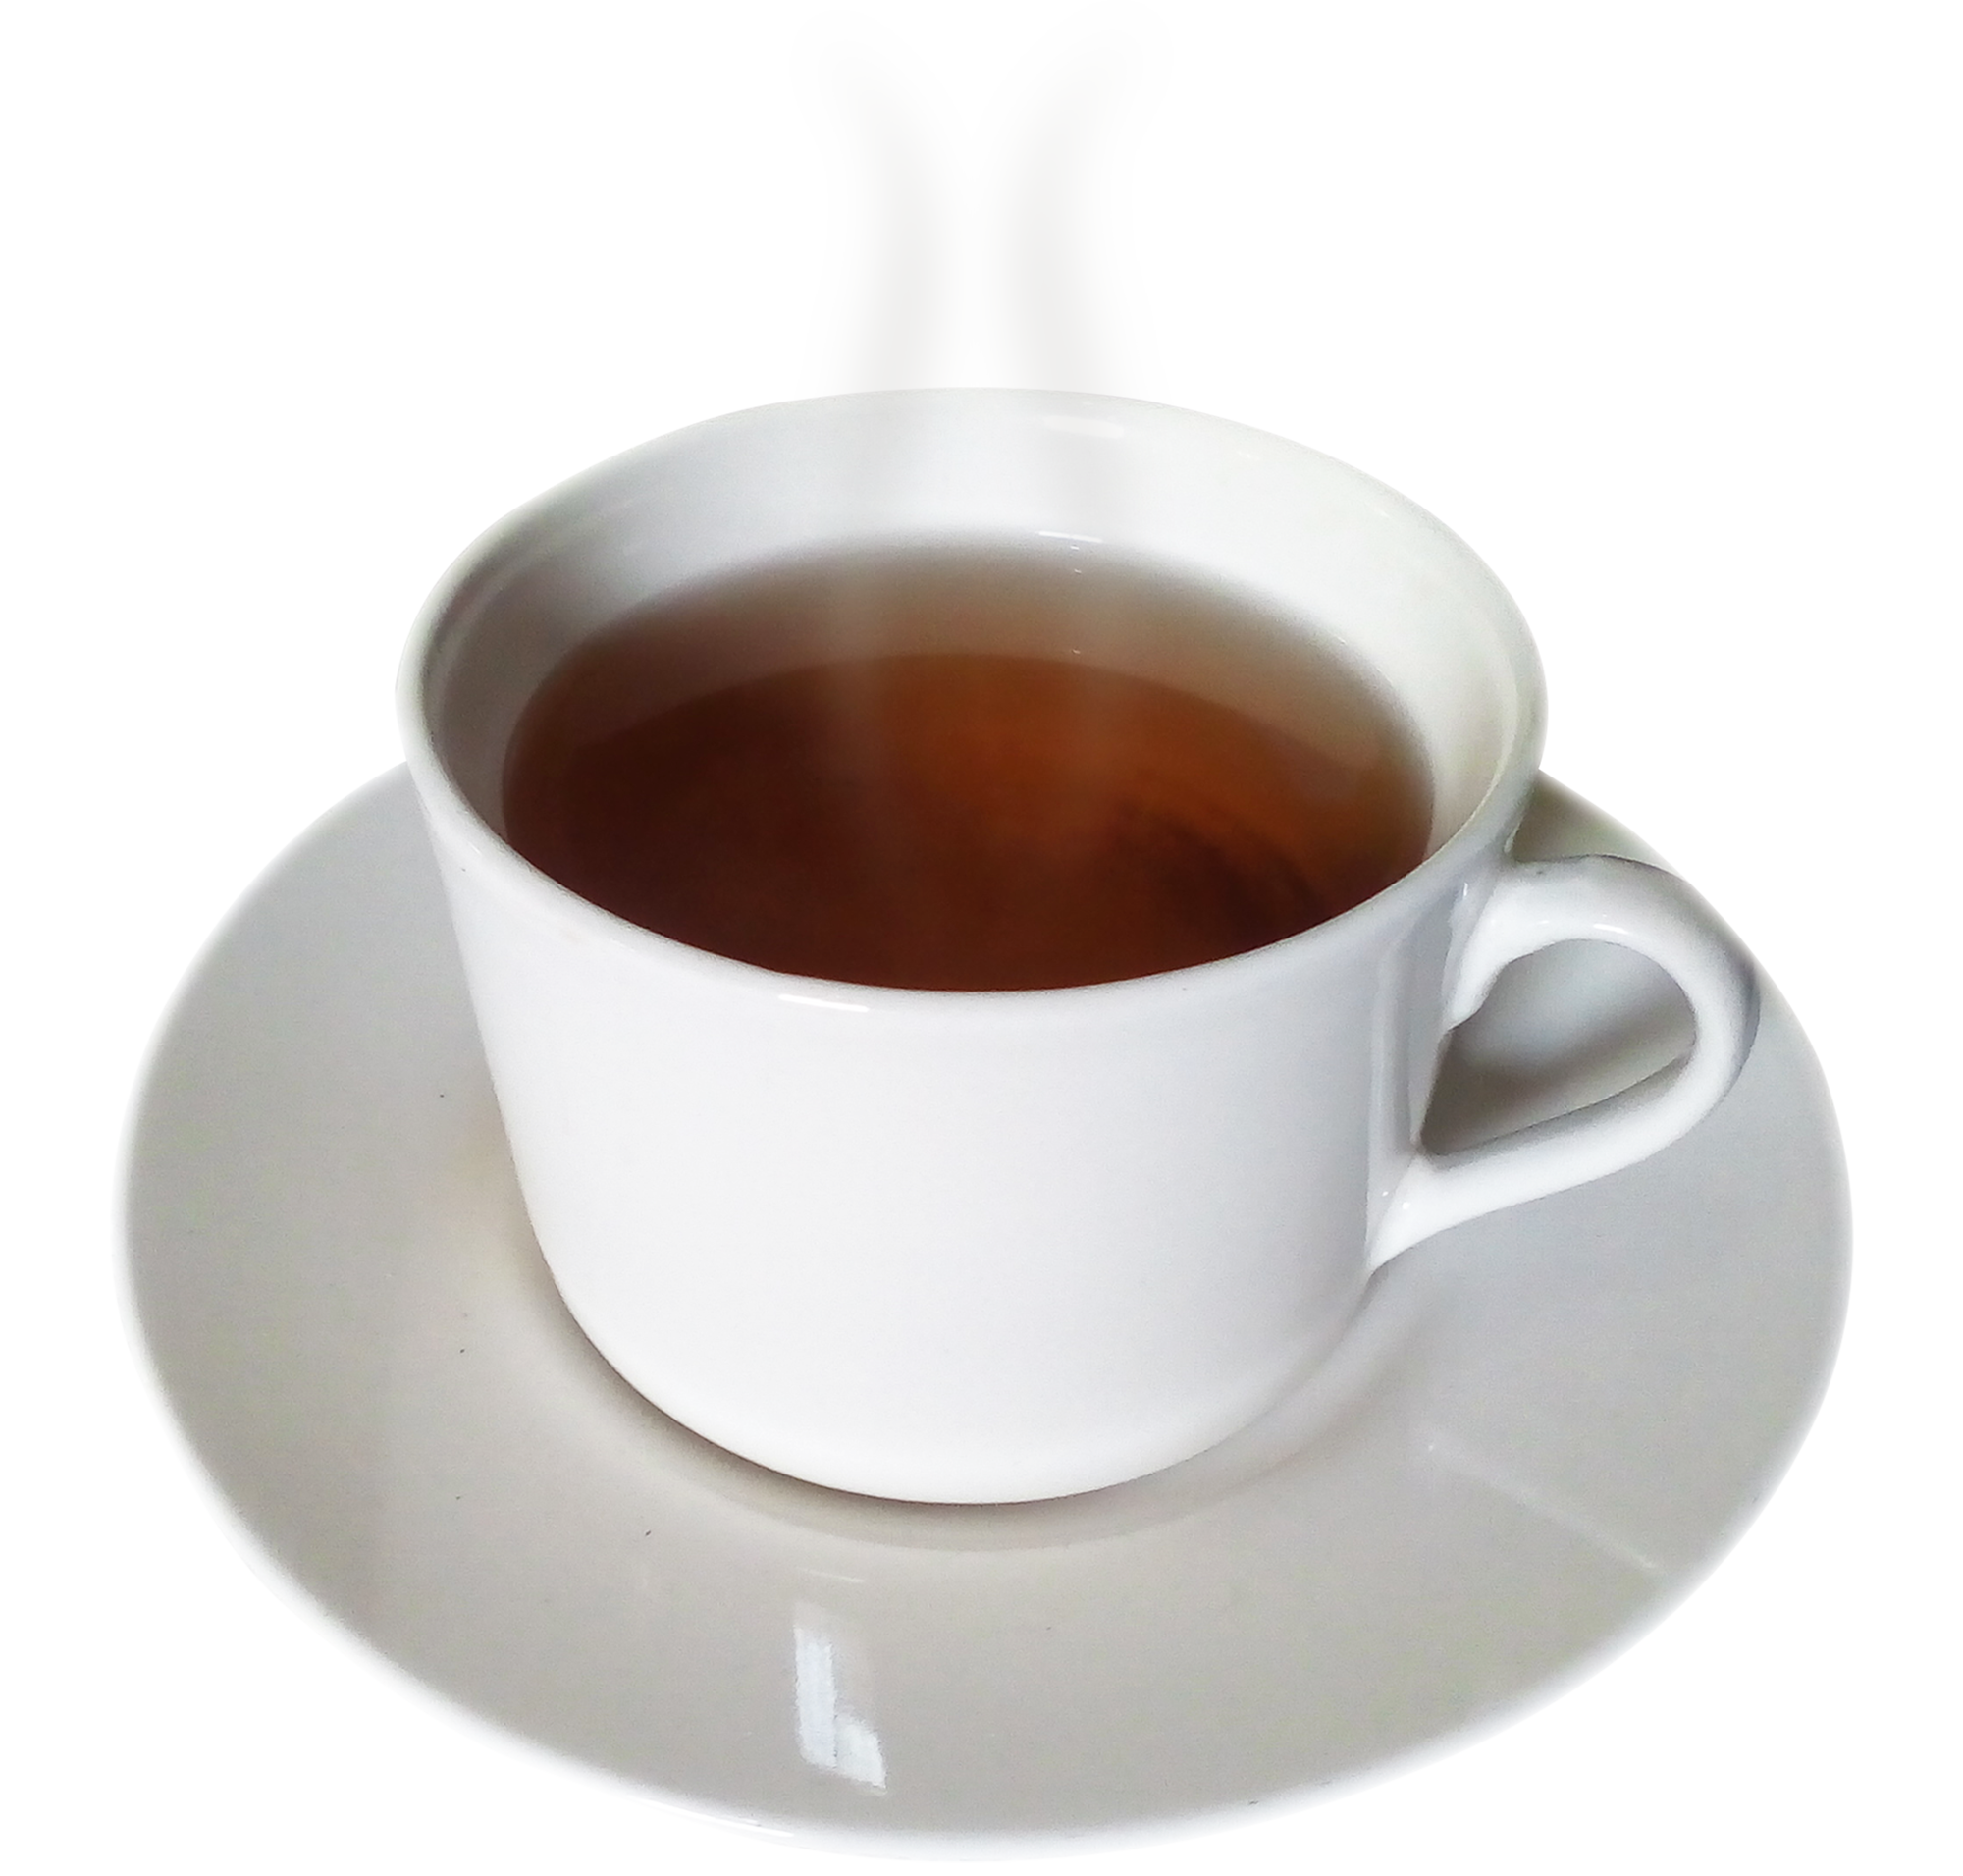 Tea in a White Cup PNG Image PurePNG Free transparent